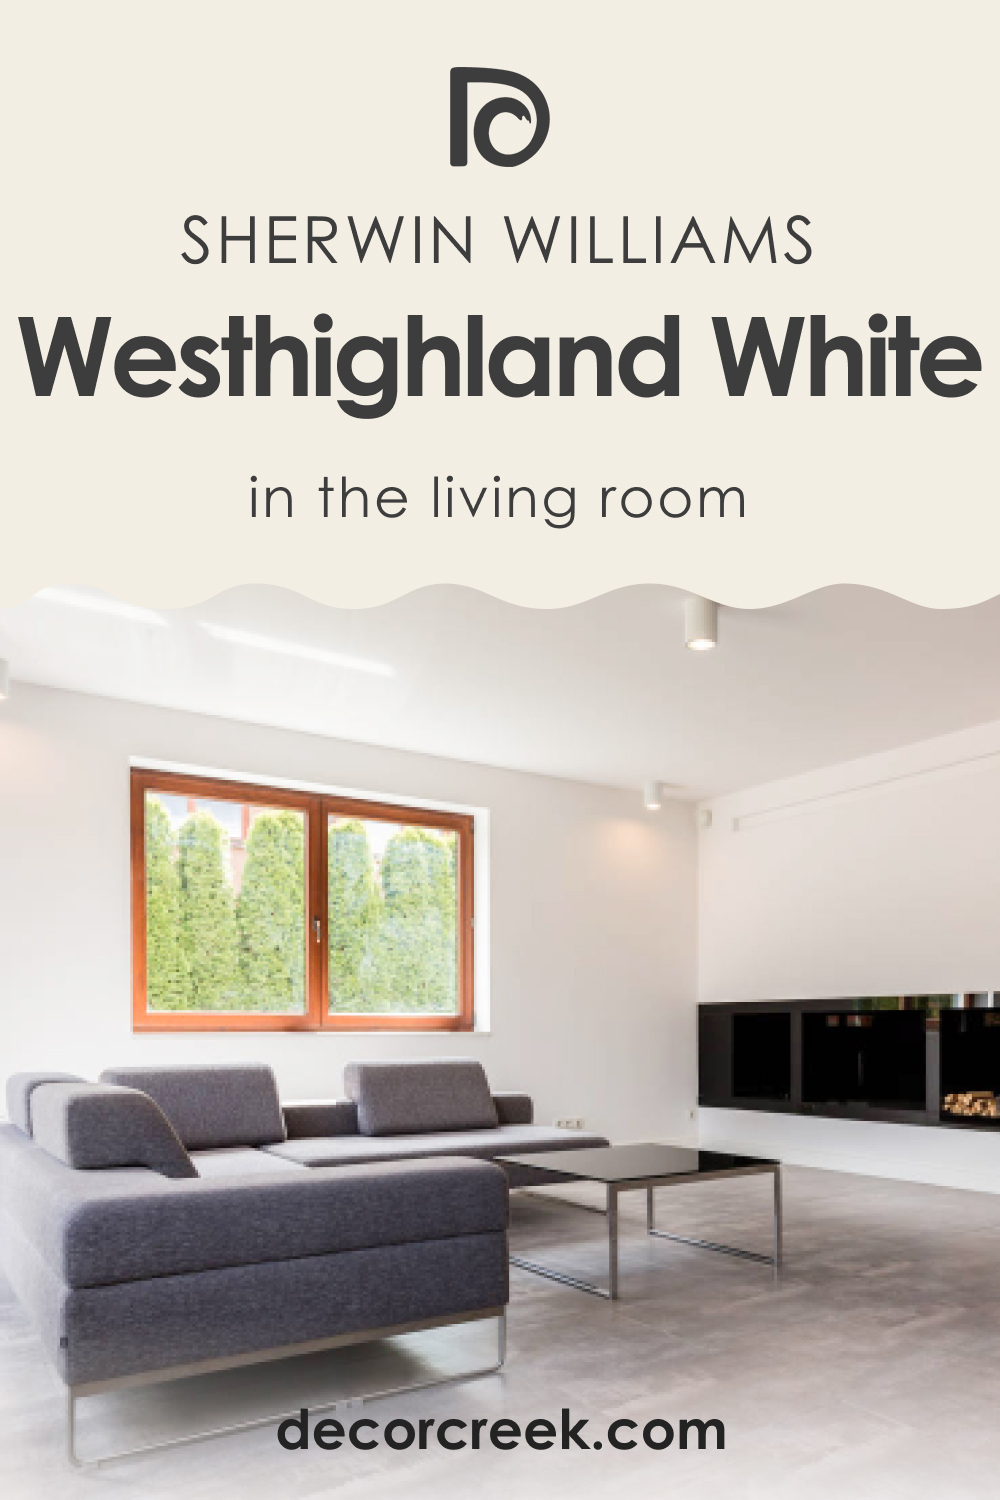 How to Use SW 7566 Westhighland White in the Living Room?